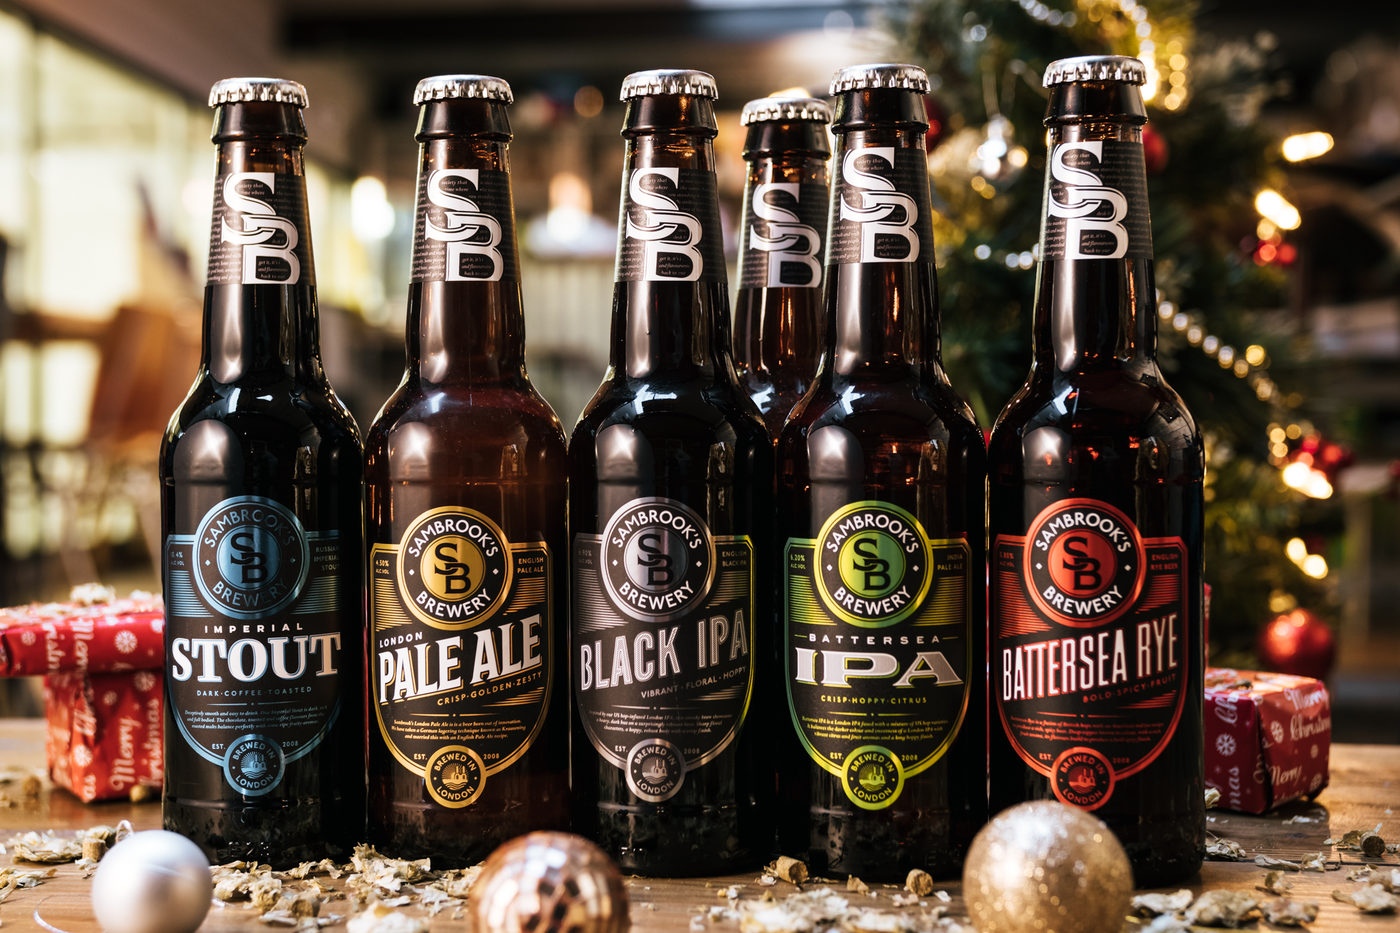 Variety of Sambrooks Brewery beer bottles lined up with festive background